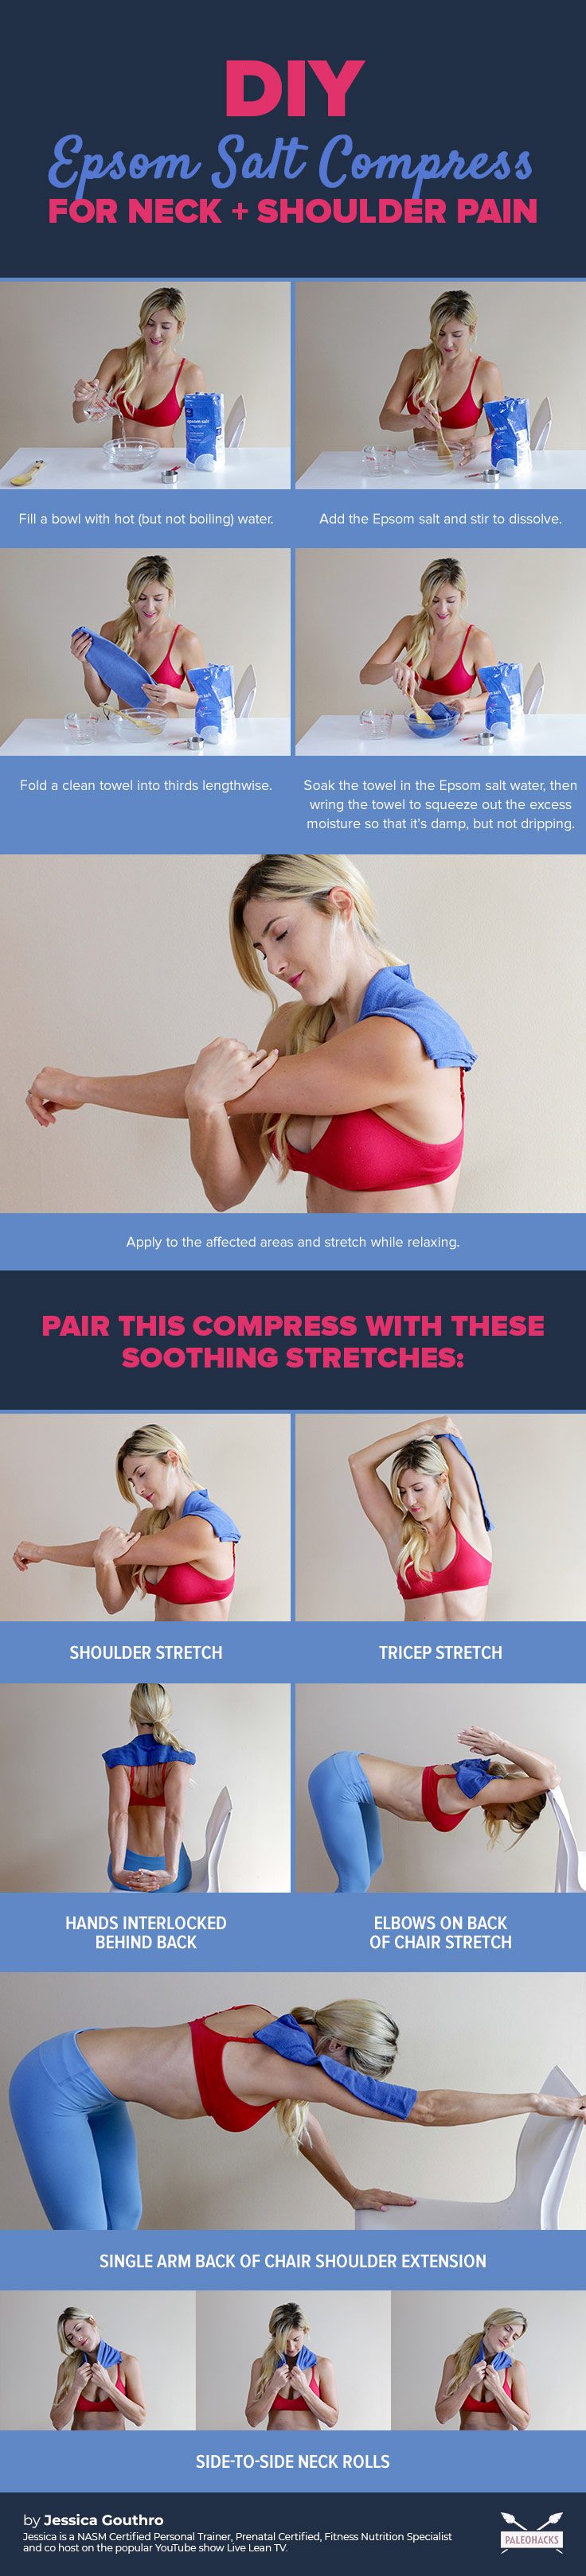 To get relief from neck and shoulder pain, stiffness, or knots, use this DIY Epsom salt compress coupled with a soothing stretch.